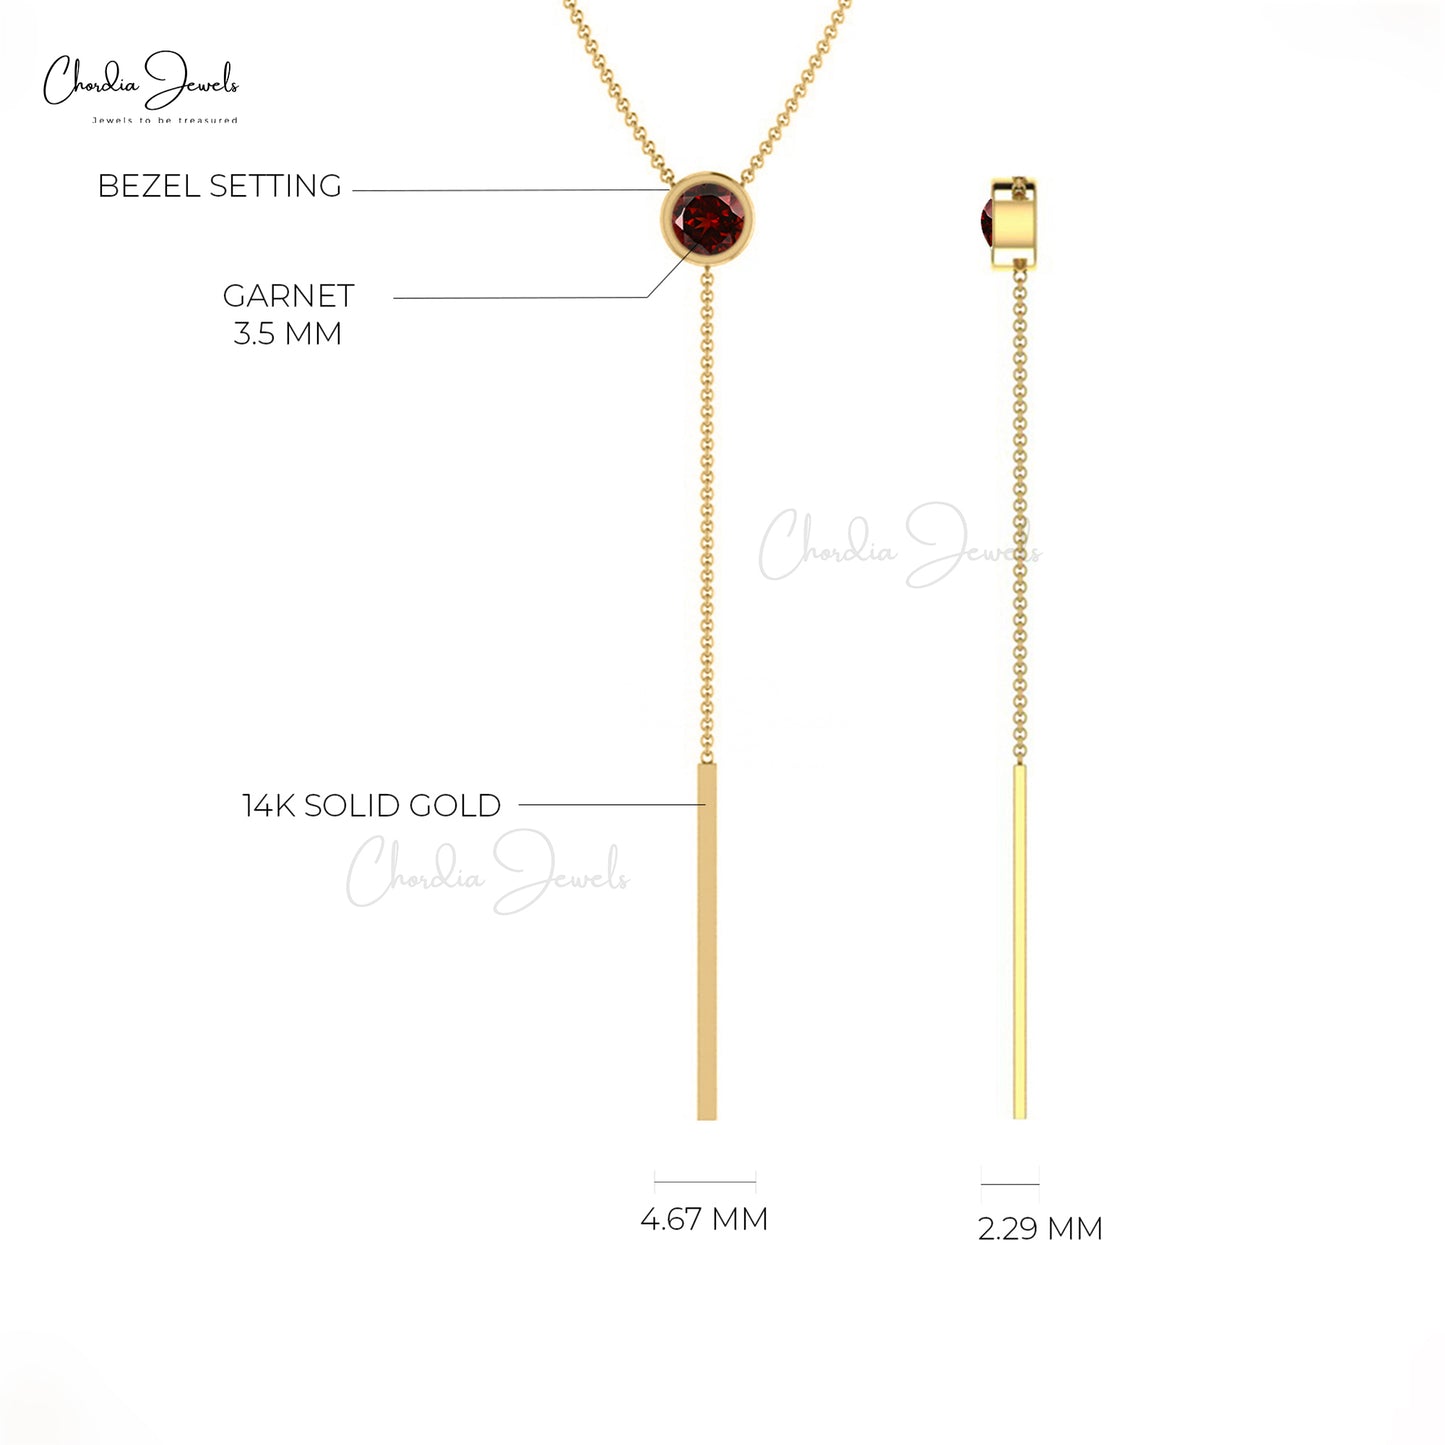 Authentic Garnet 14k Solid Gold Chain Lariat Necklace For Women